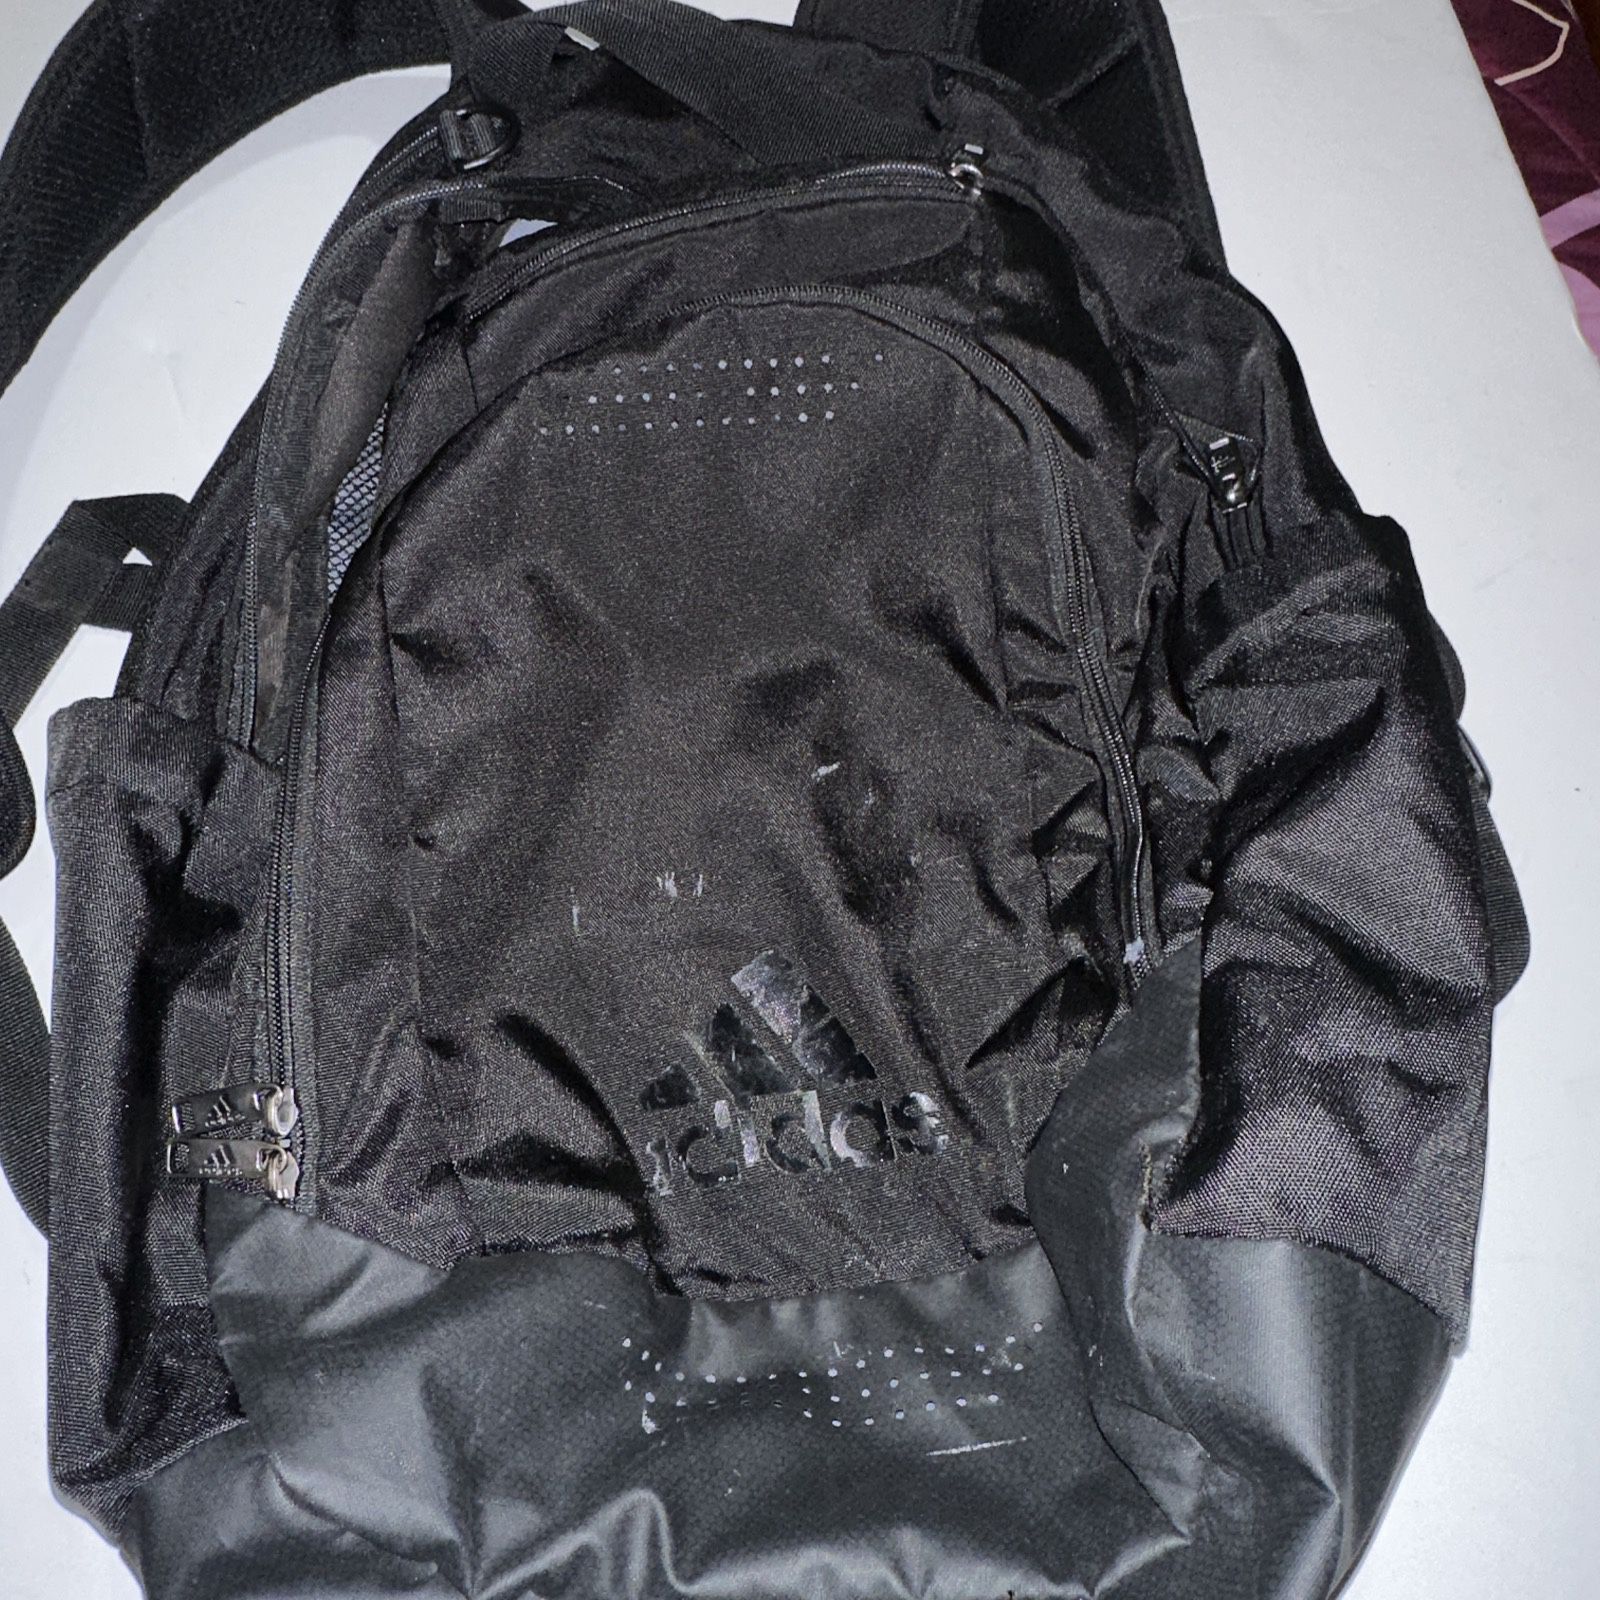 Adult Unisex Adidas Backpack Black Small Whit Stains On Front